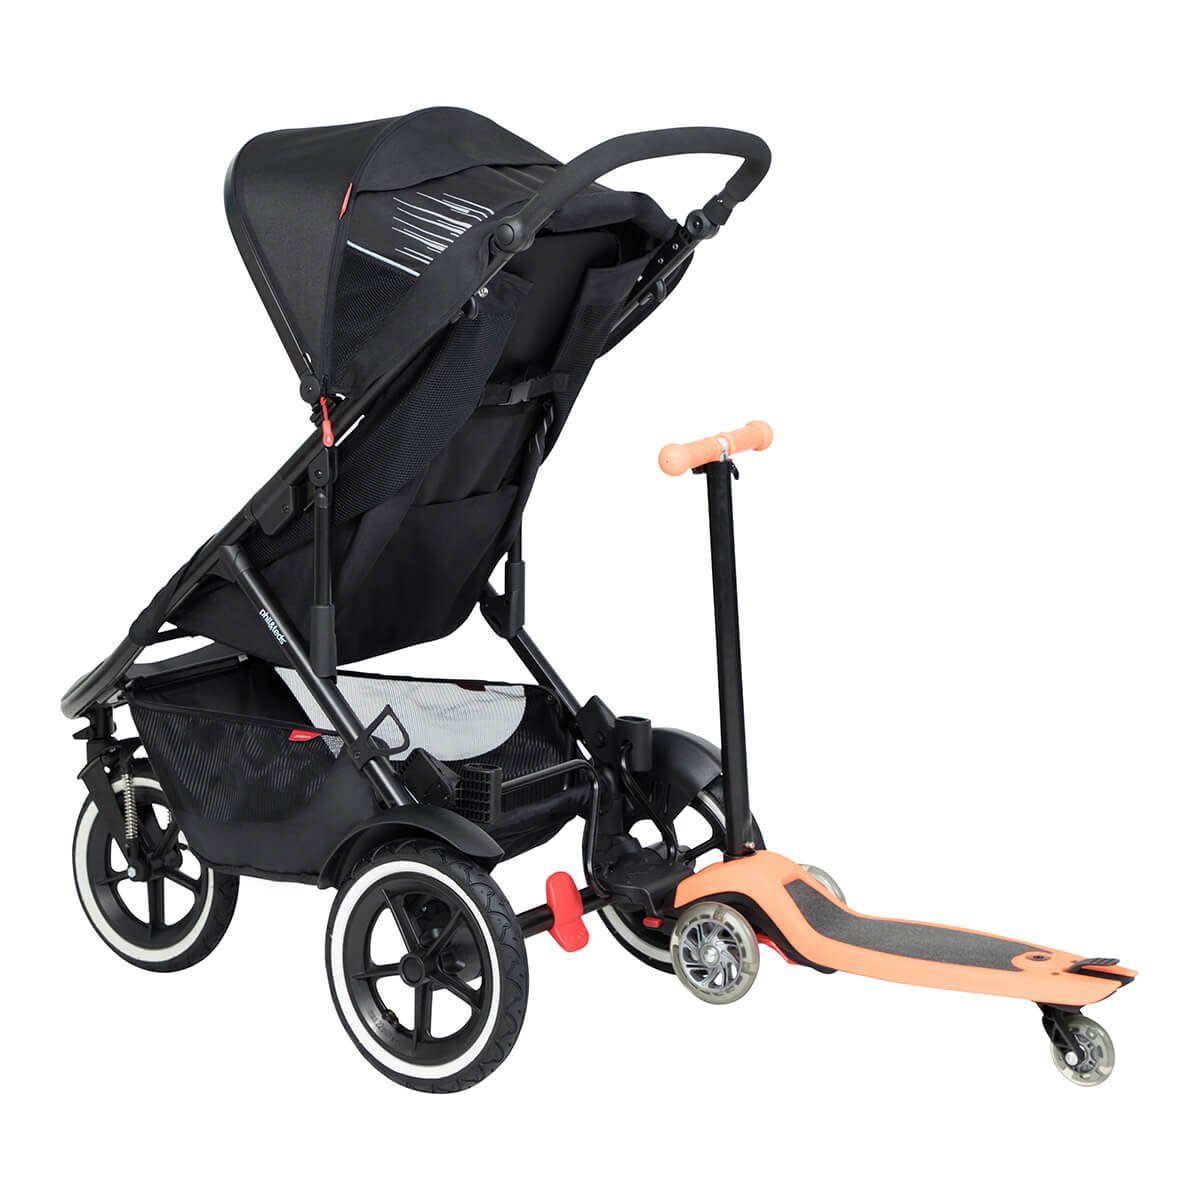 https://cdn.accentuate.io/4467127091253/19118870757429/philteds-sport-buggy-with-freerider-stroller-board-in-rear-v1626403835367.jpg?1200x1200